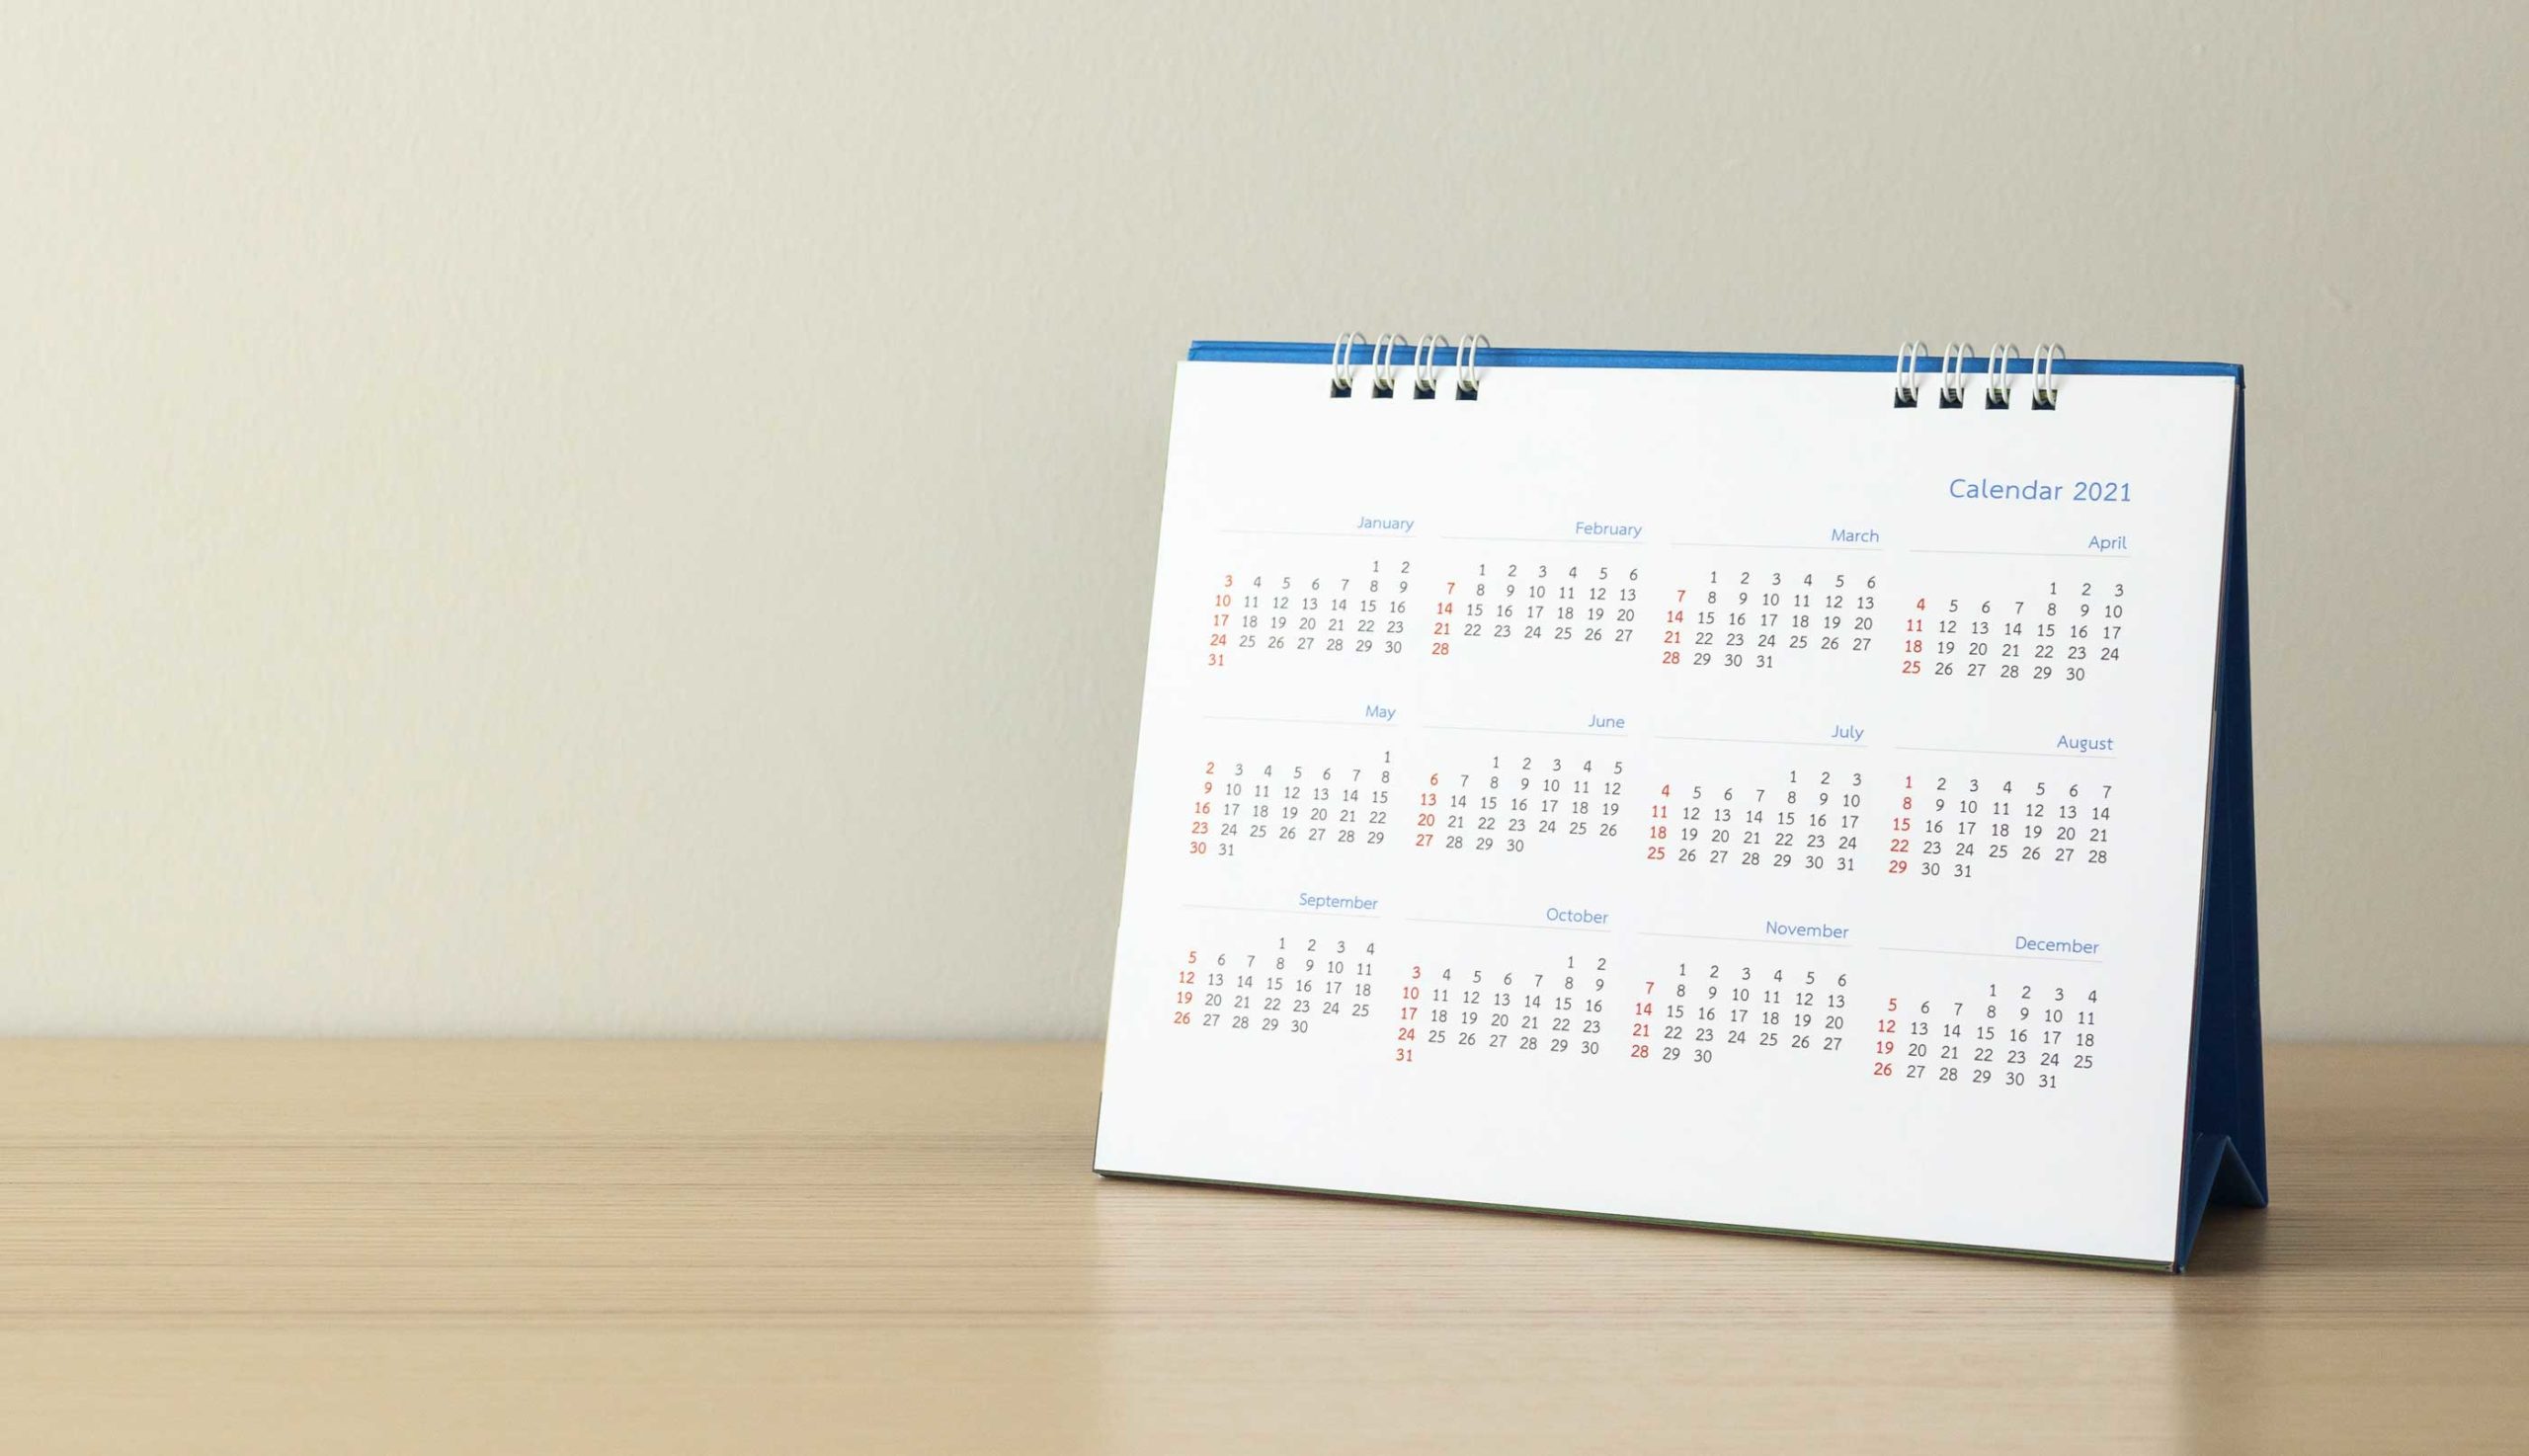 A patient checks a calendar before they confirm availability and schedule upcoming appointments at a behavioral health clinic at a date/time when there is availability